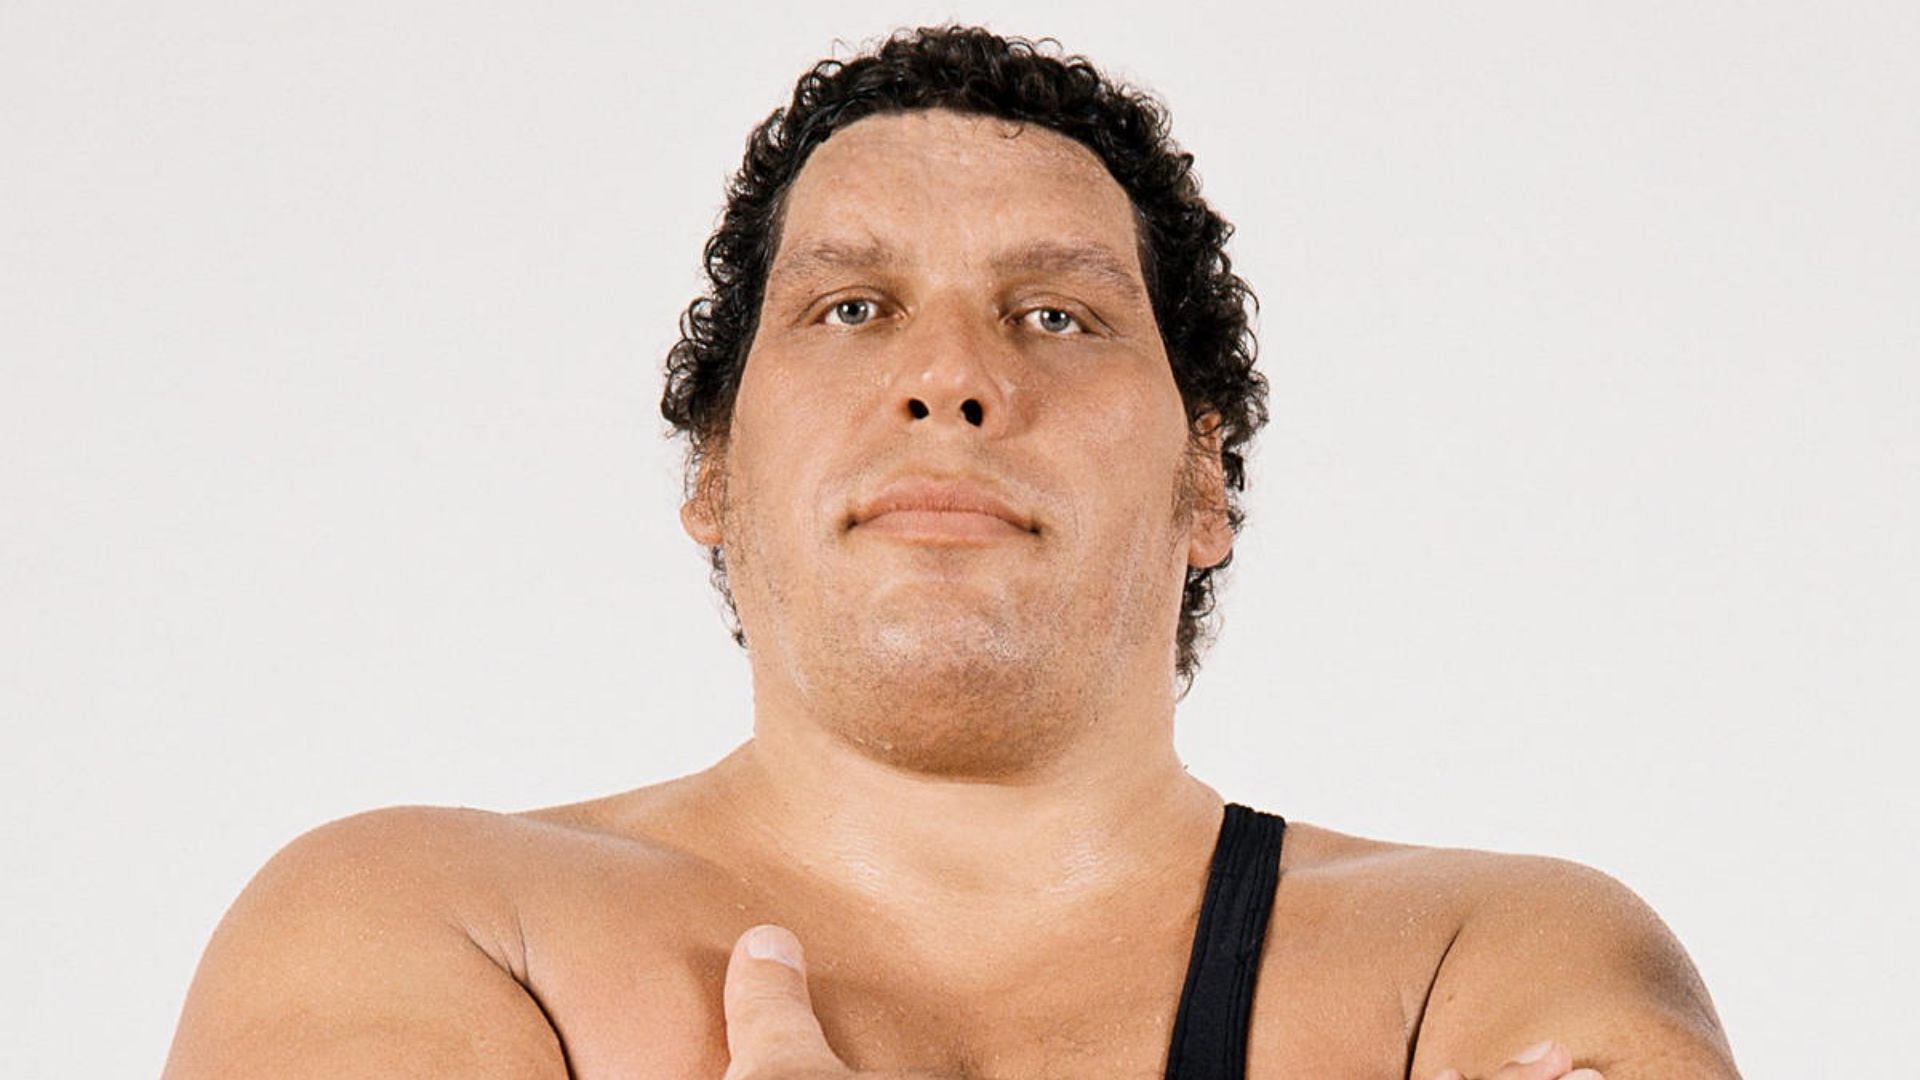 WWE Hall of Famer Andre the Giant